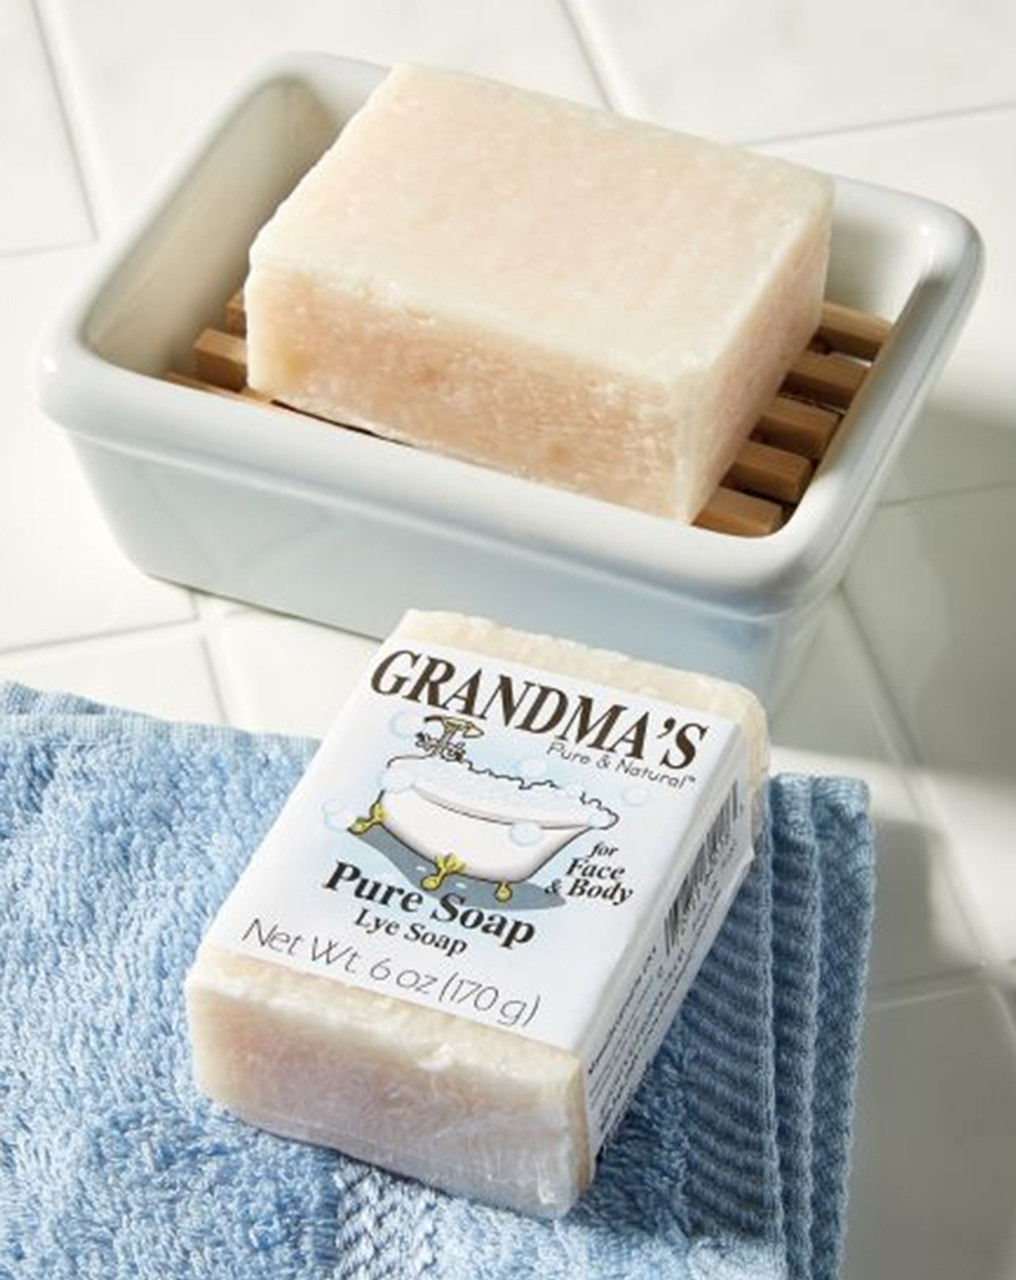 Remwood Products Co. Grandma's Lye Soap for Face & Body 6 oz Bar(S) 